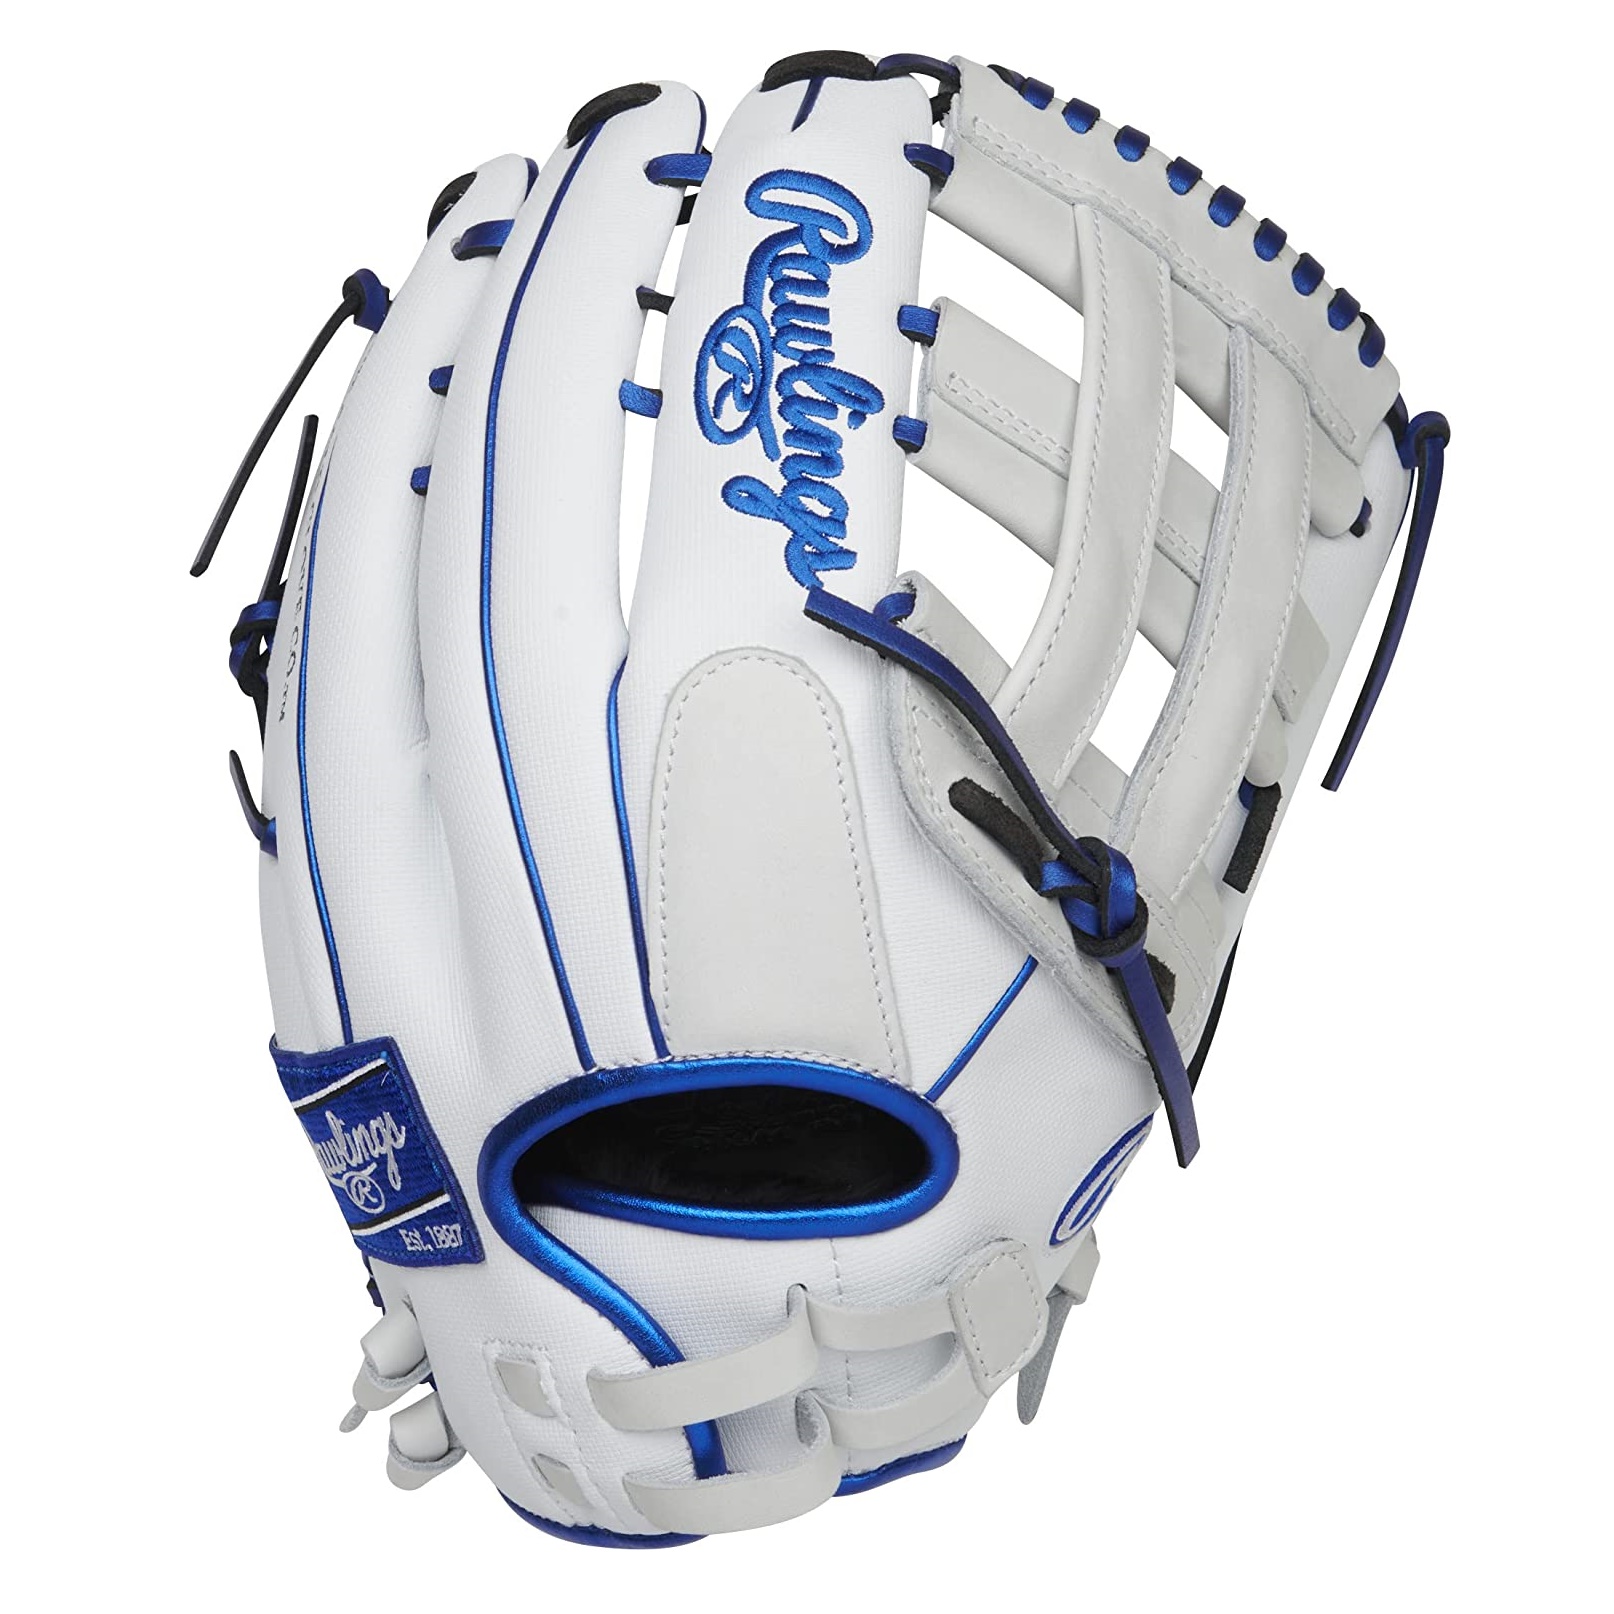 rawlings-liberty-advanced-fastpitch-softball-glove-pro-h-web-13-inch-right-hand-throw RLA130-6WSS-RightHandThrow Rawlings  <p>Rawlings Liberty Advanced fielding gloves continue the tradition as finest in